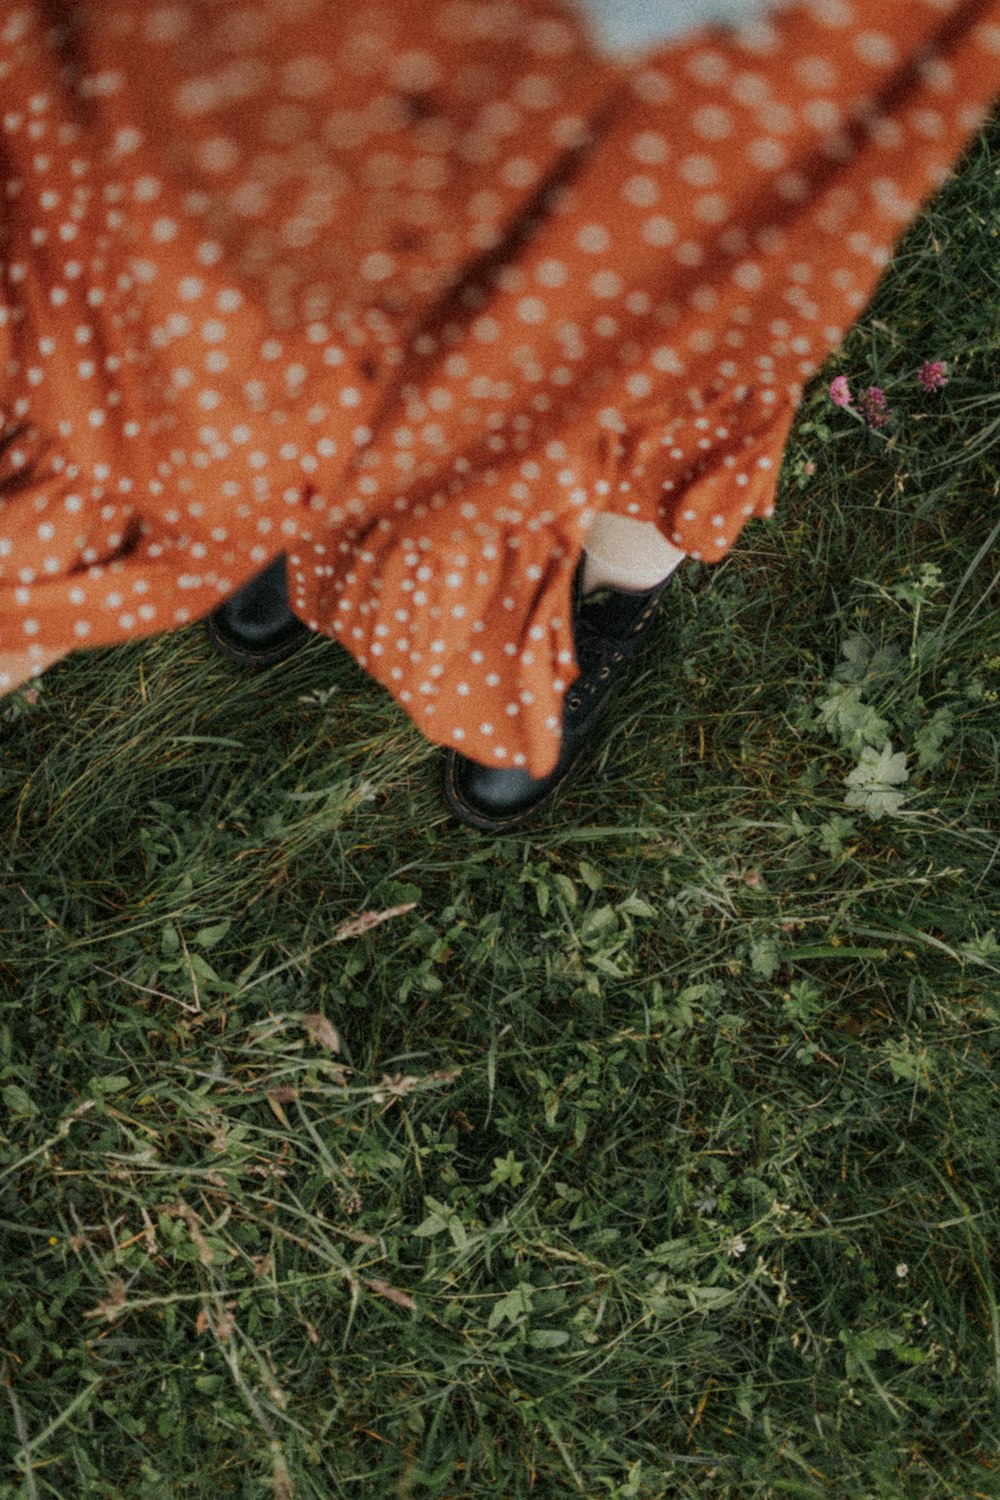 person in orange and white polka dot dress standing on green grass